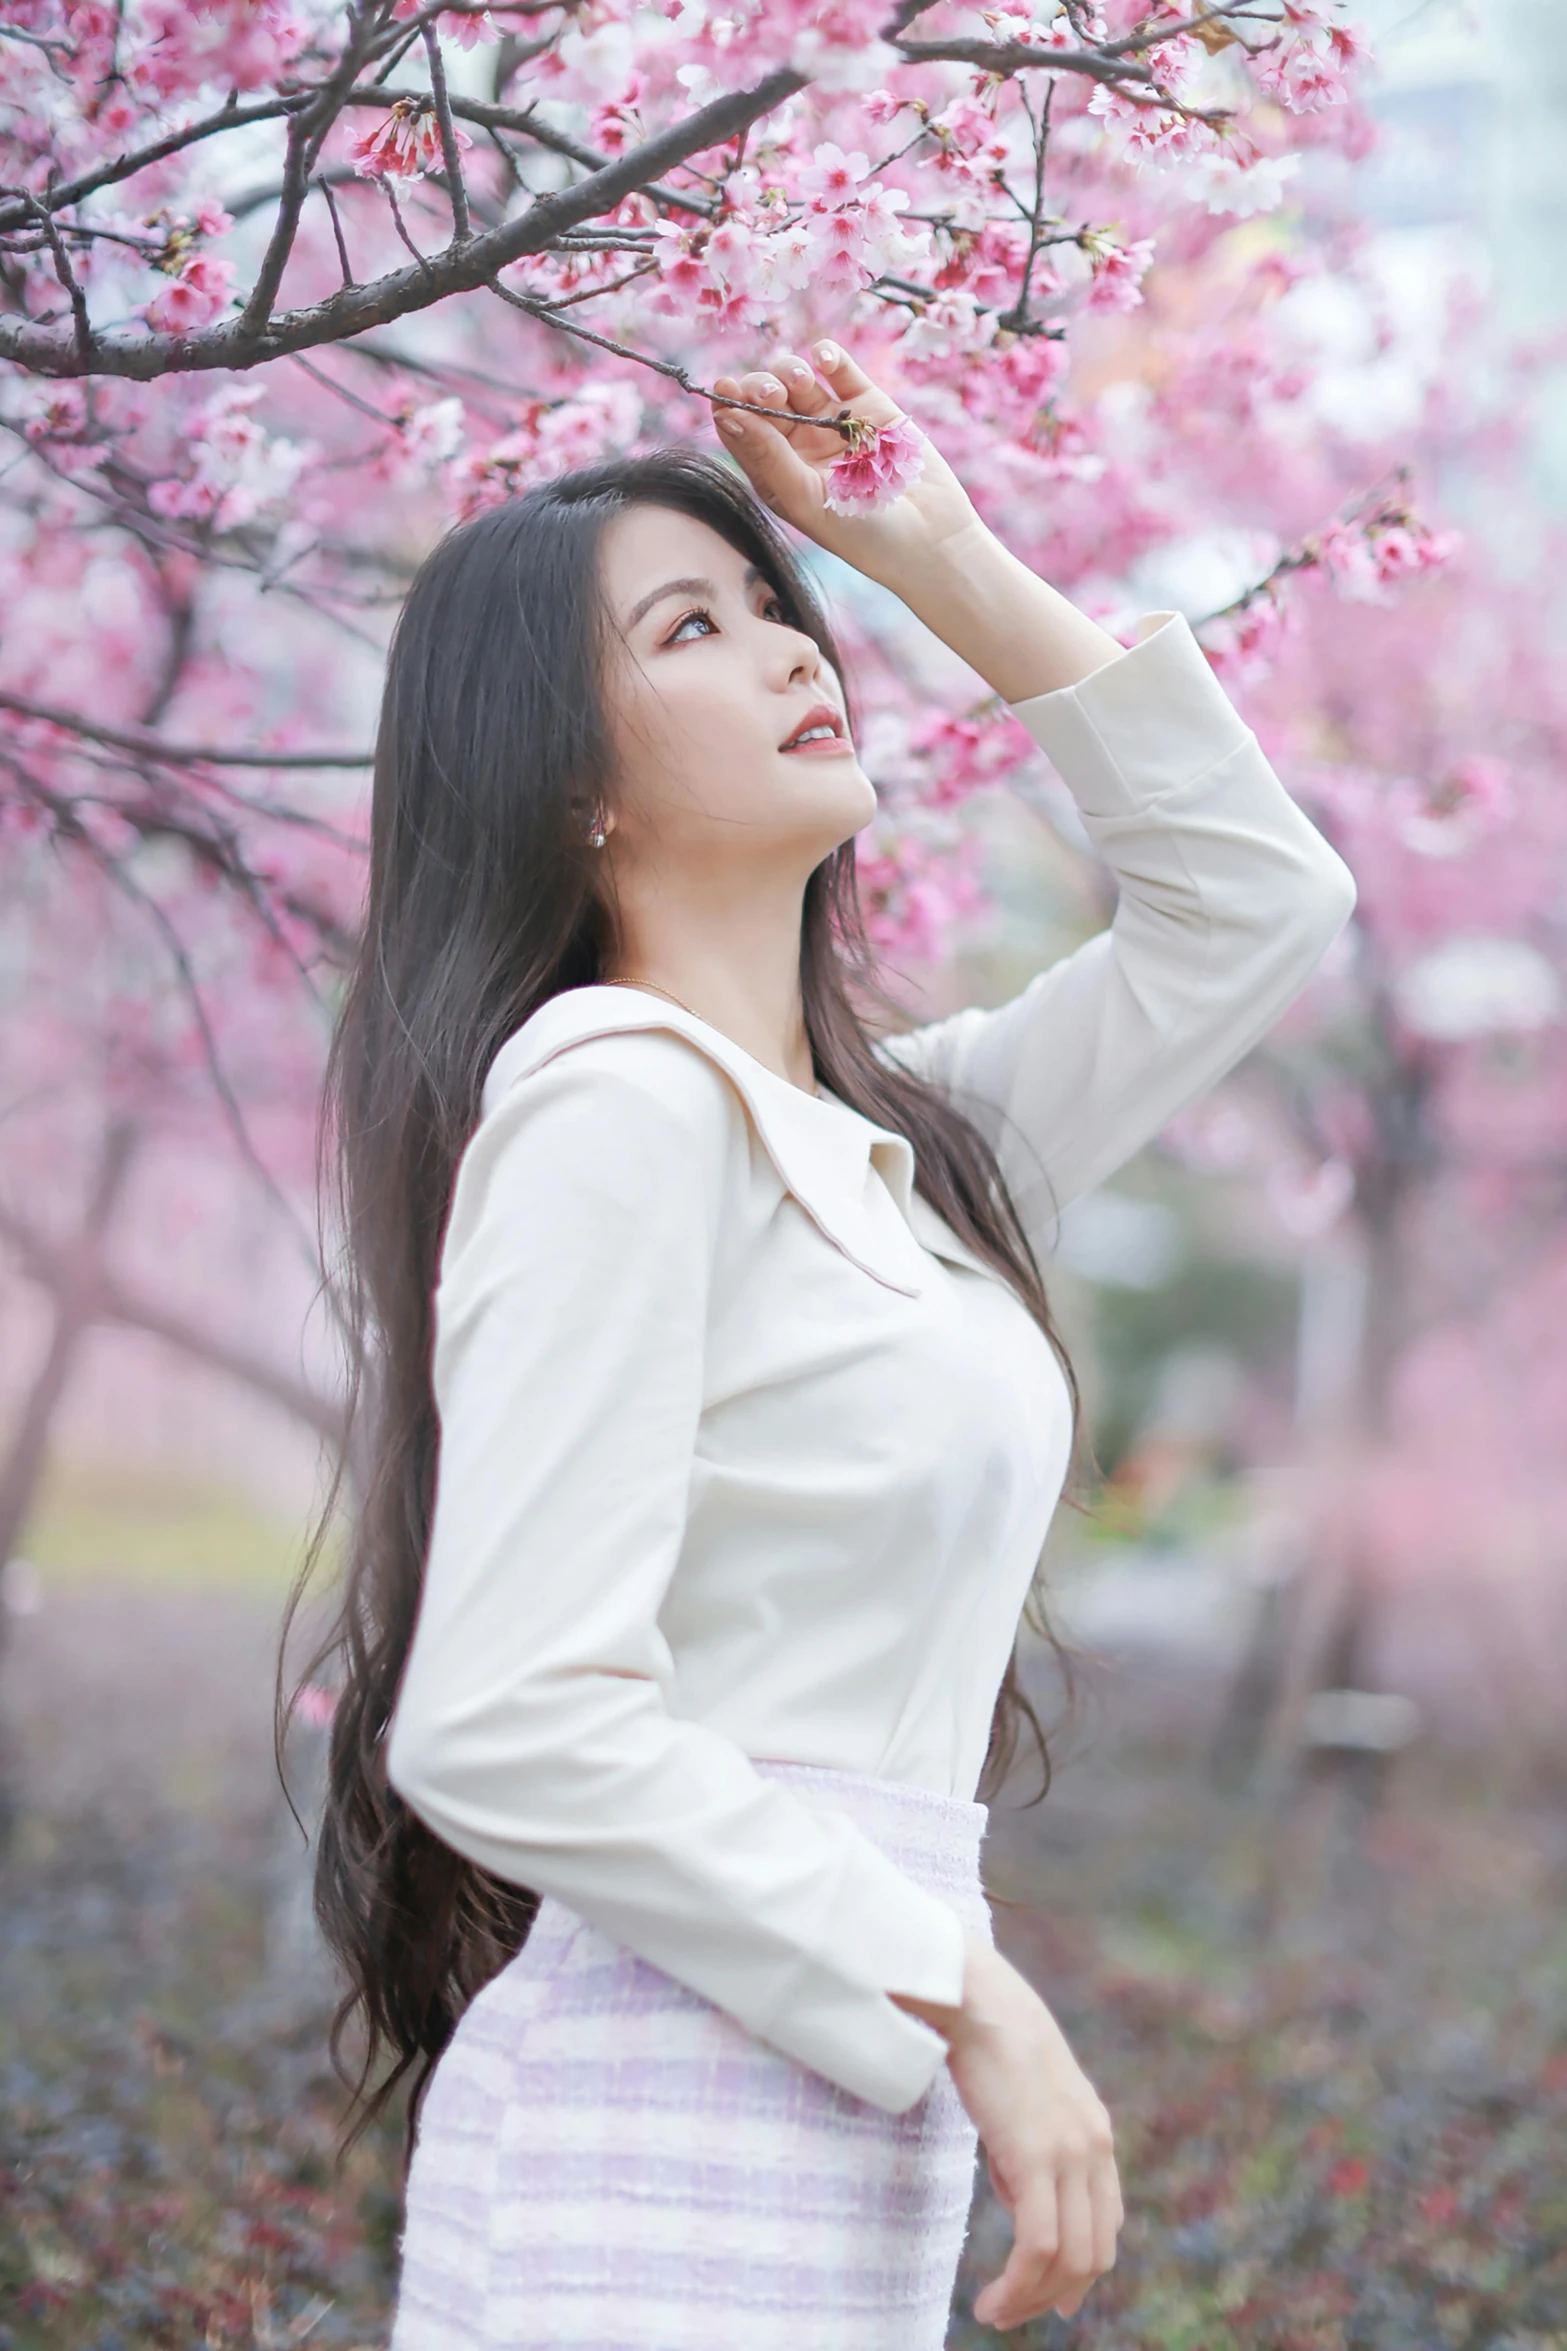 a woman wearing a white shirt standing in front of pink flowers